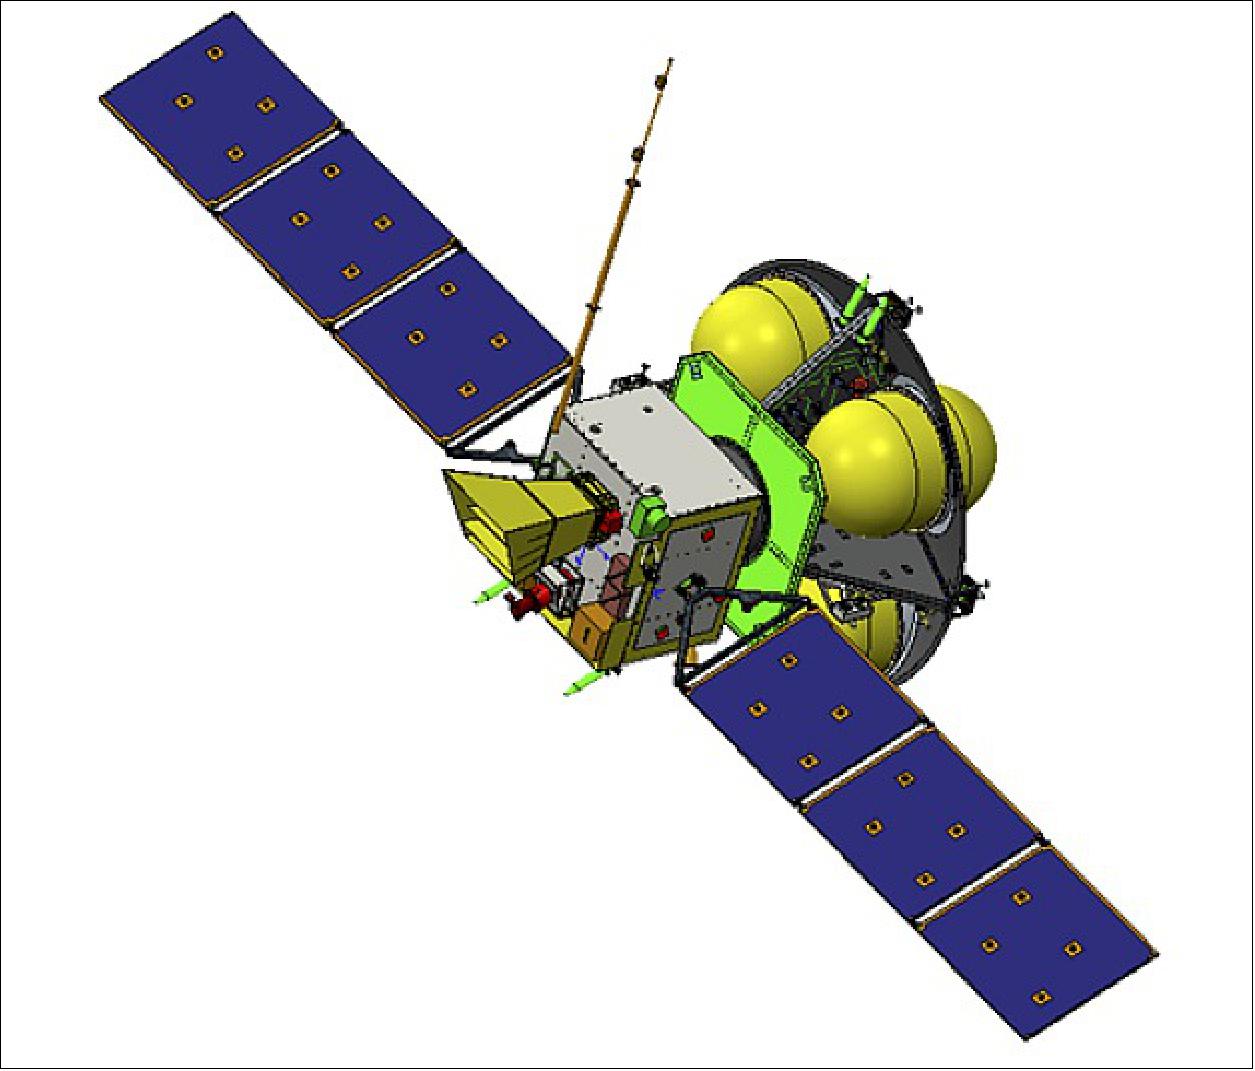 Figure 2: Artist's impression of the SMILE spacecraft as of May 2020 (image credit: CAS/ESA)